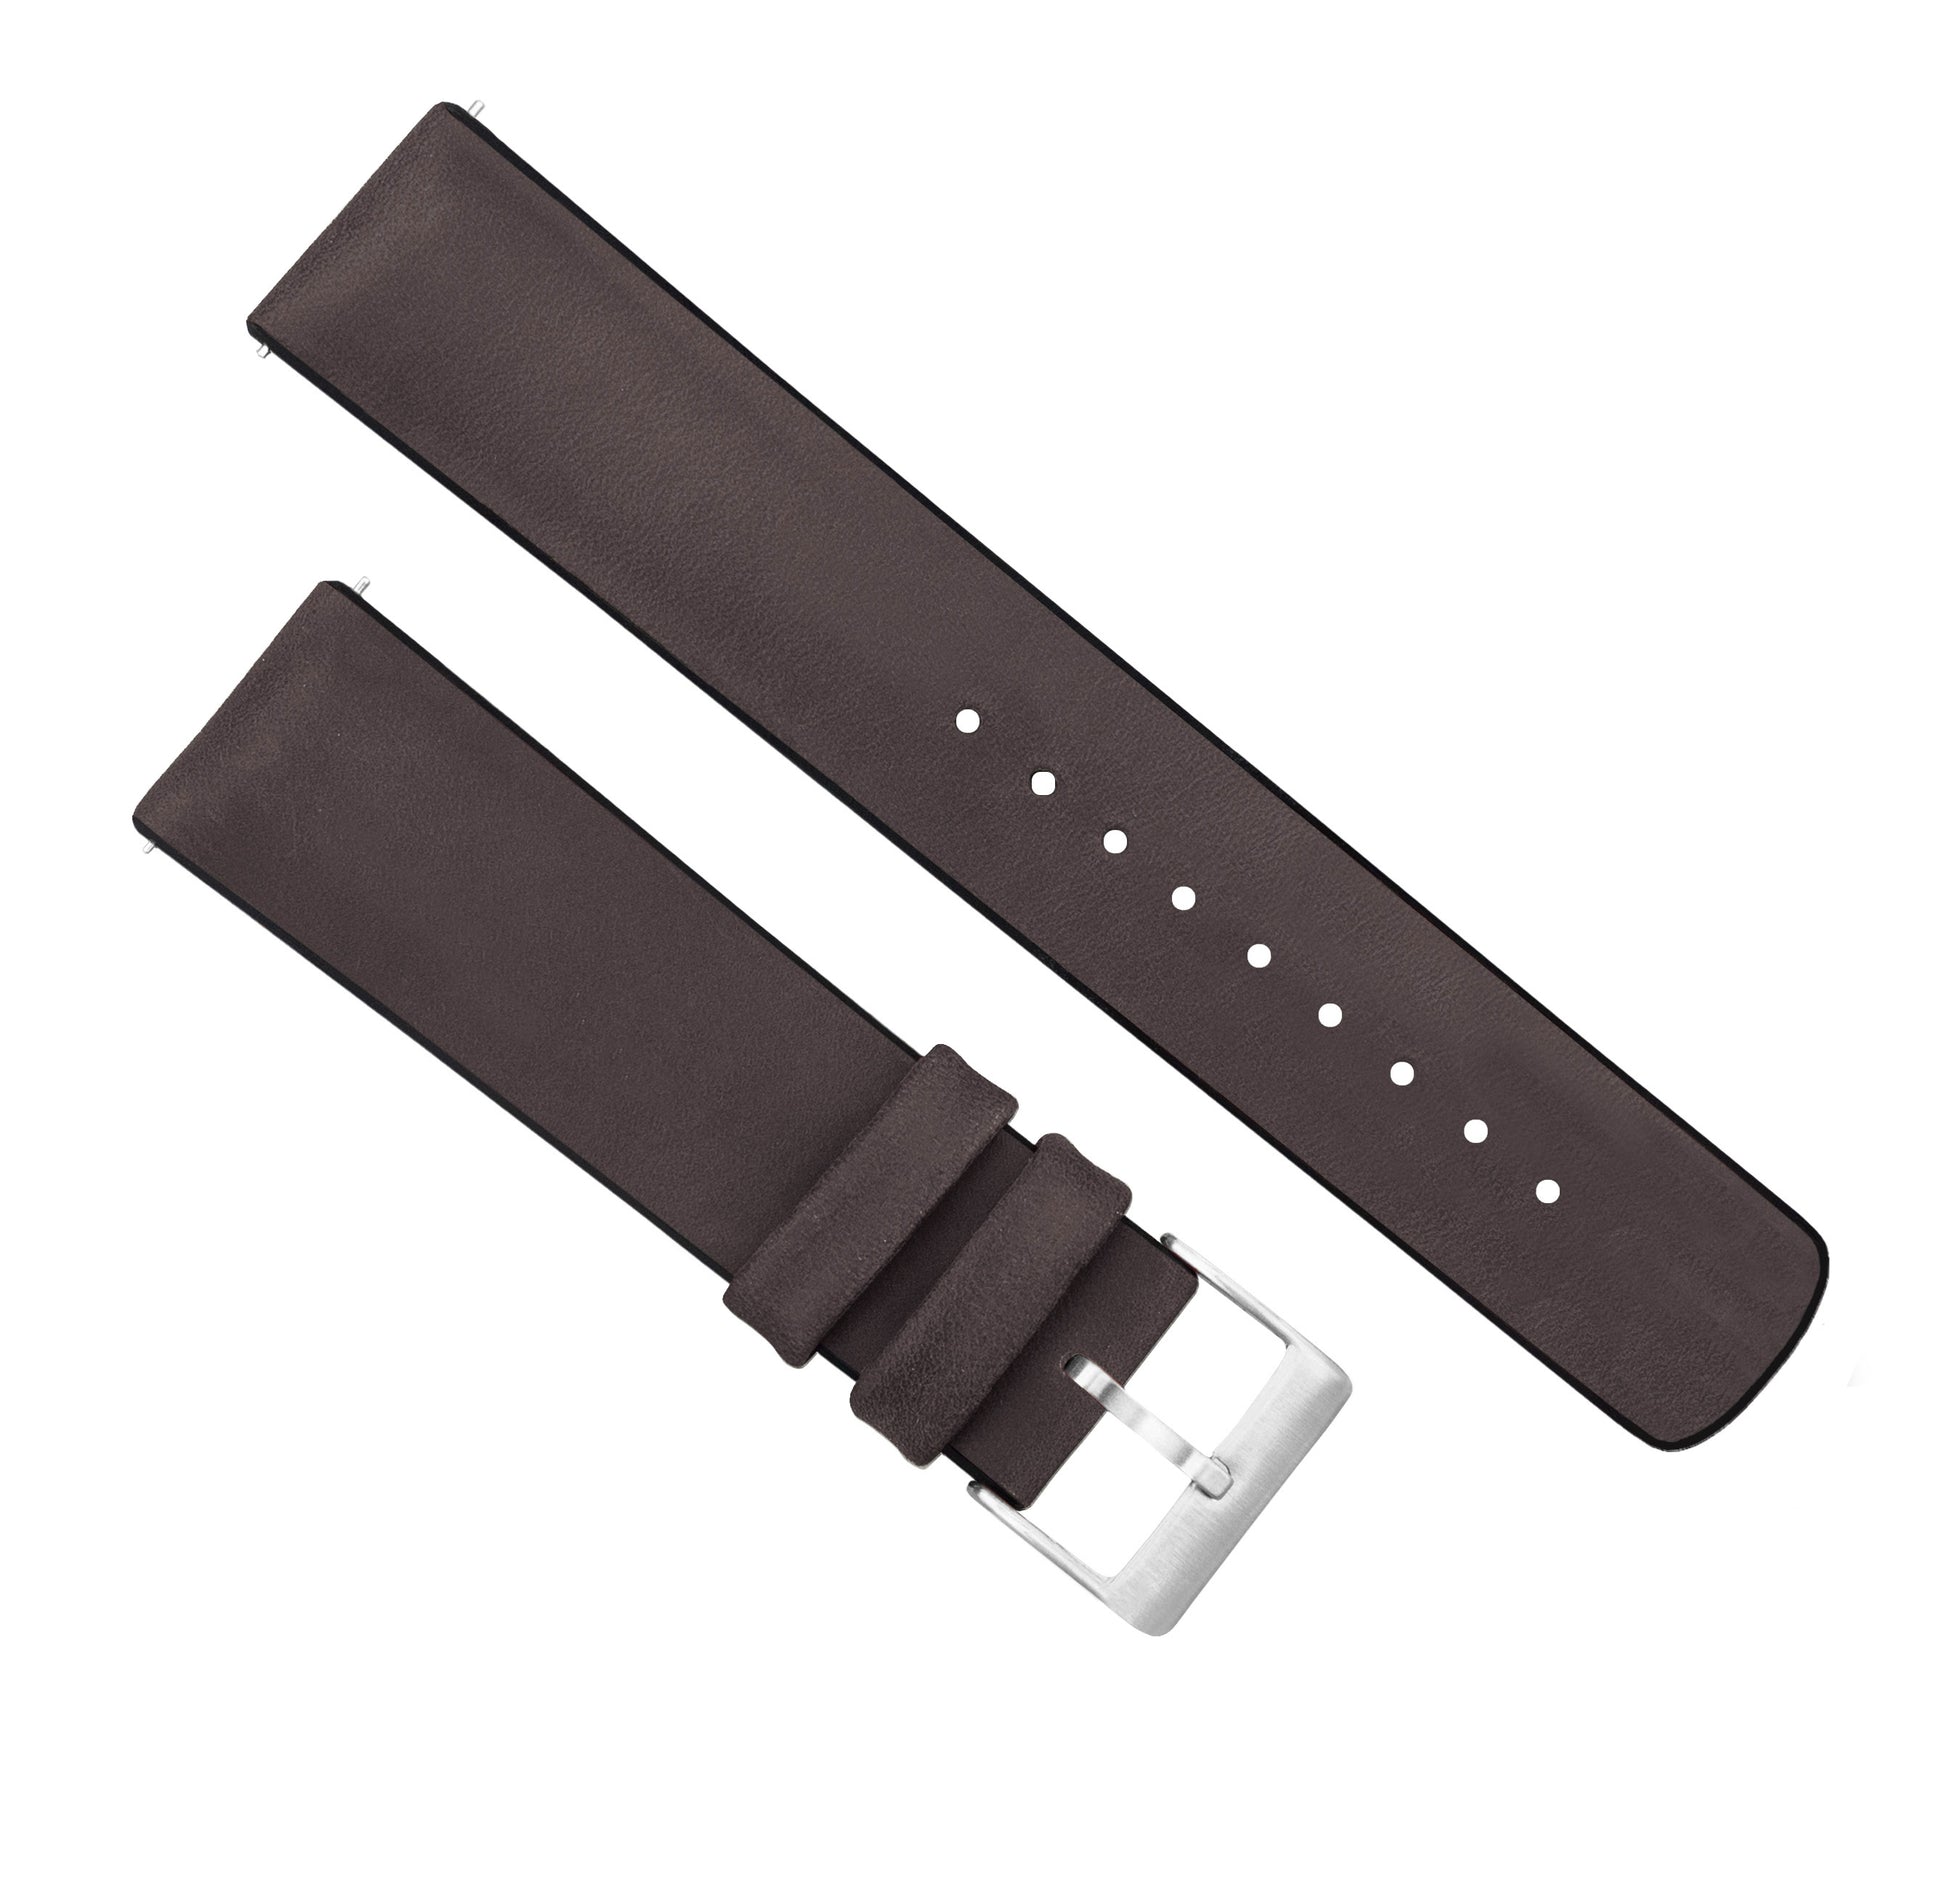 Zenwatch & Zenwatch 2 | Leather and Rubber Hybrid | Smoke Brown - Barton Watch Bands